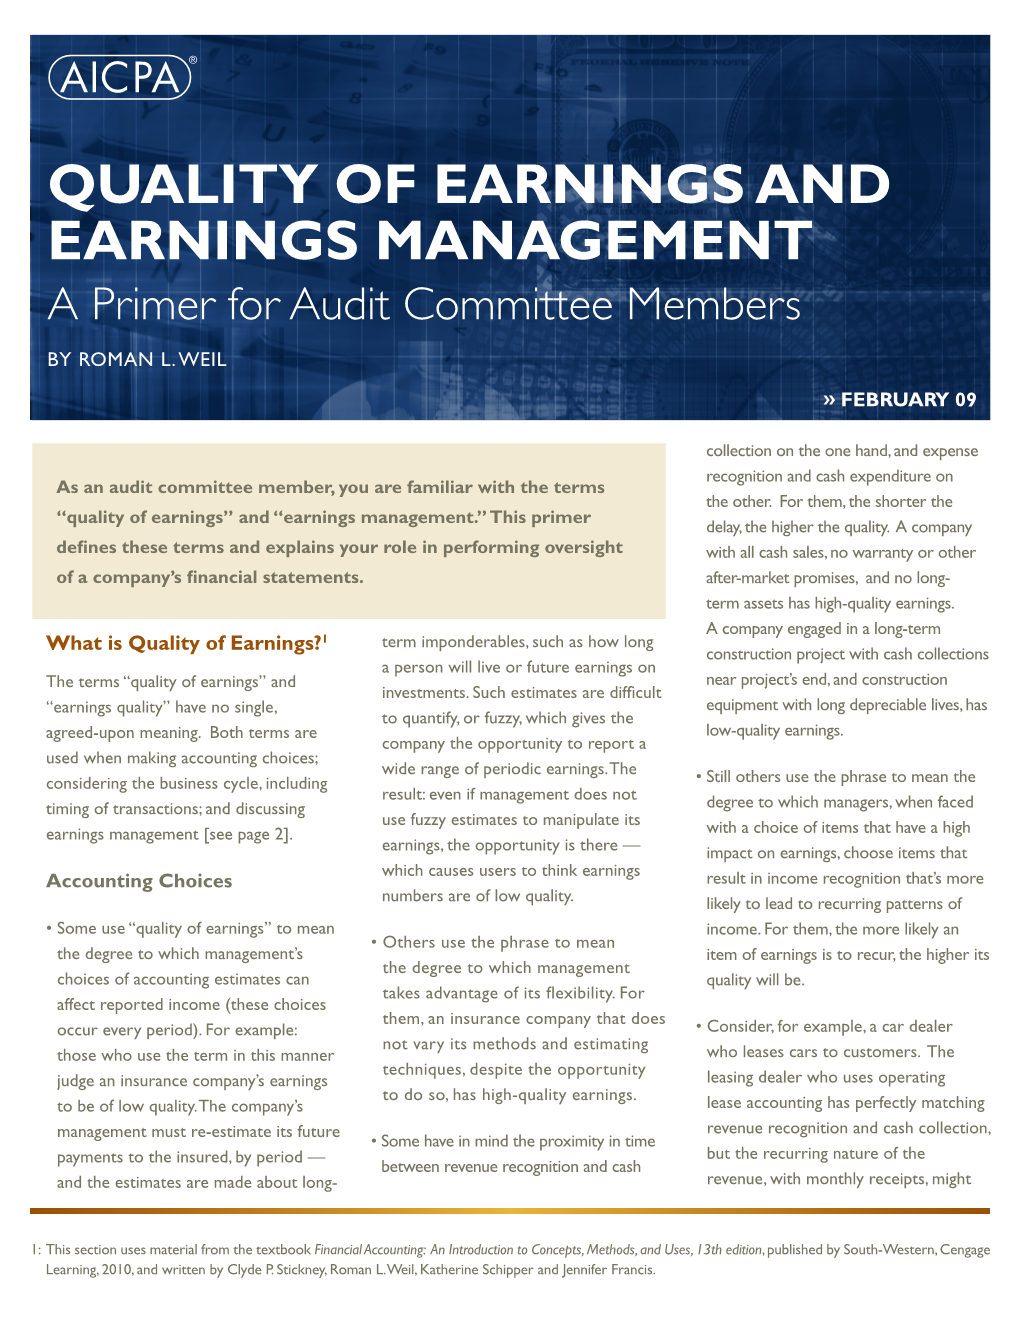 QUALITY of EARNINGS and Earnings Management a Primer for Audit Committee Members by Roman L